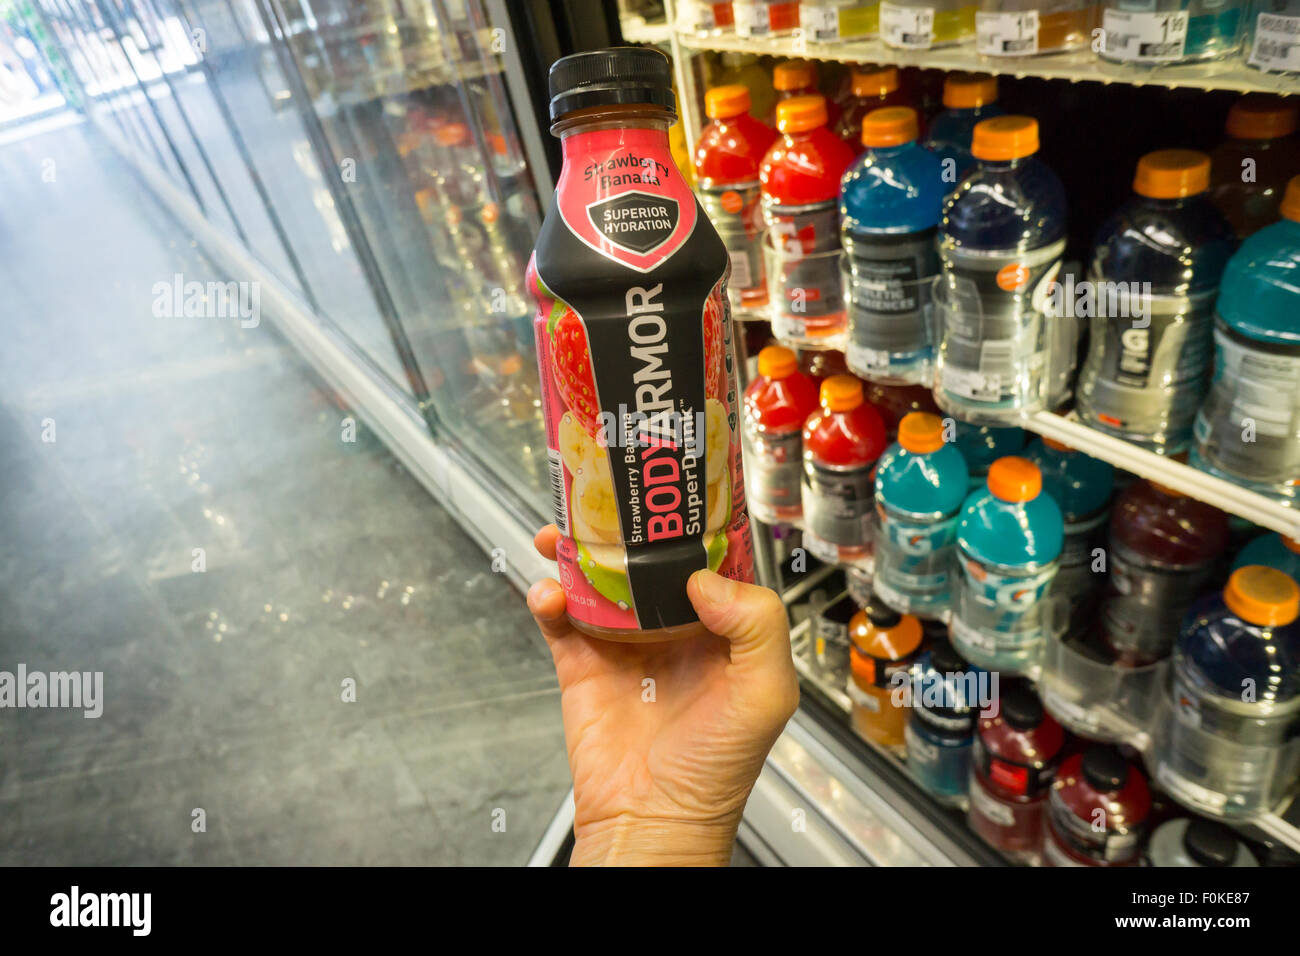 A shopper chooses a bottle of BodyArmor sports drink in a convenience store in New York on Thursday, August 13, 2015. Dr Pepper Snapple Group has bought an 11.7% interest  for $20 million in BodyArmor, a competitor to Gatorade. NBA player Kobe Bryant is also an investor. The drink is considered healthier than its rivals Gatorade and Powerade as it uses cane sugar, not high-fructose corn syrup as a sweetener.  (© Richard B. Levine) Stock Photo